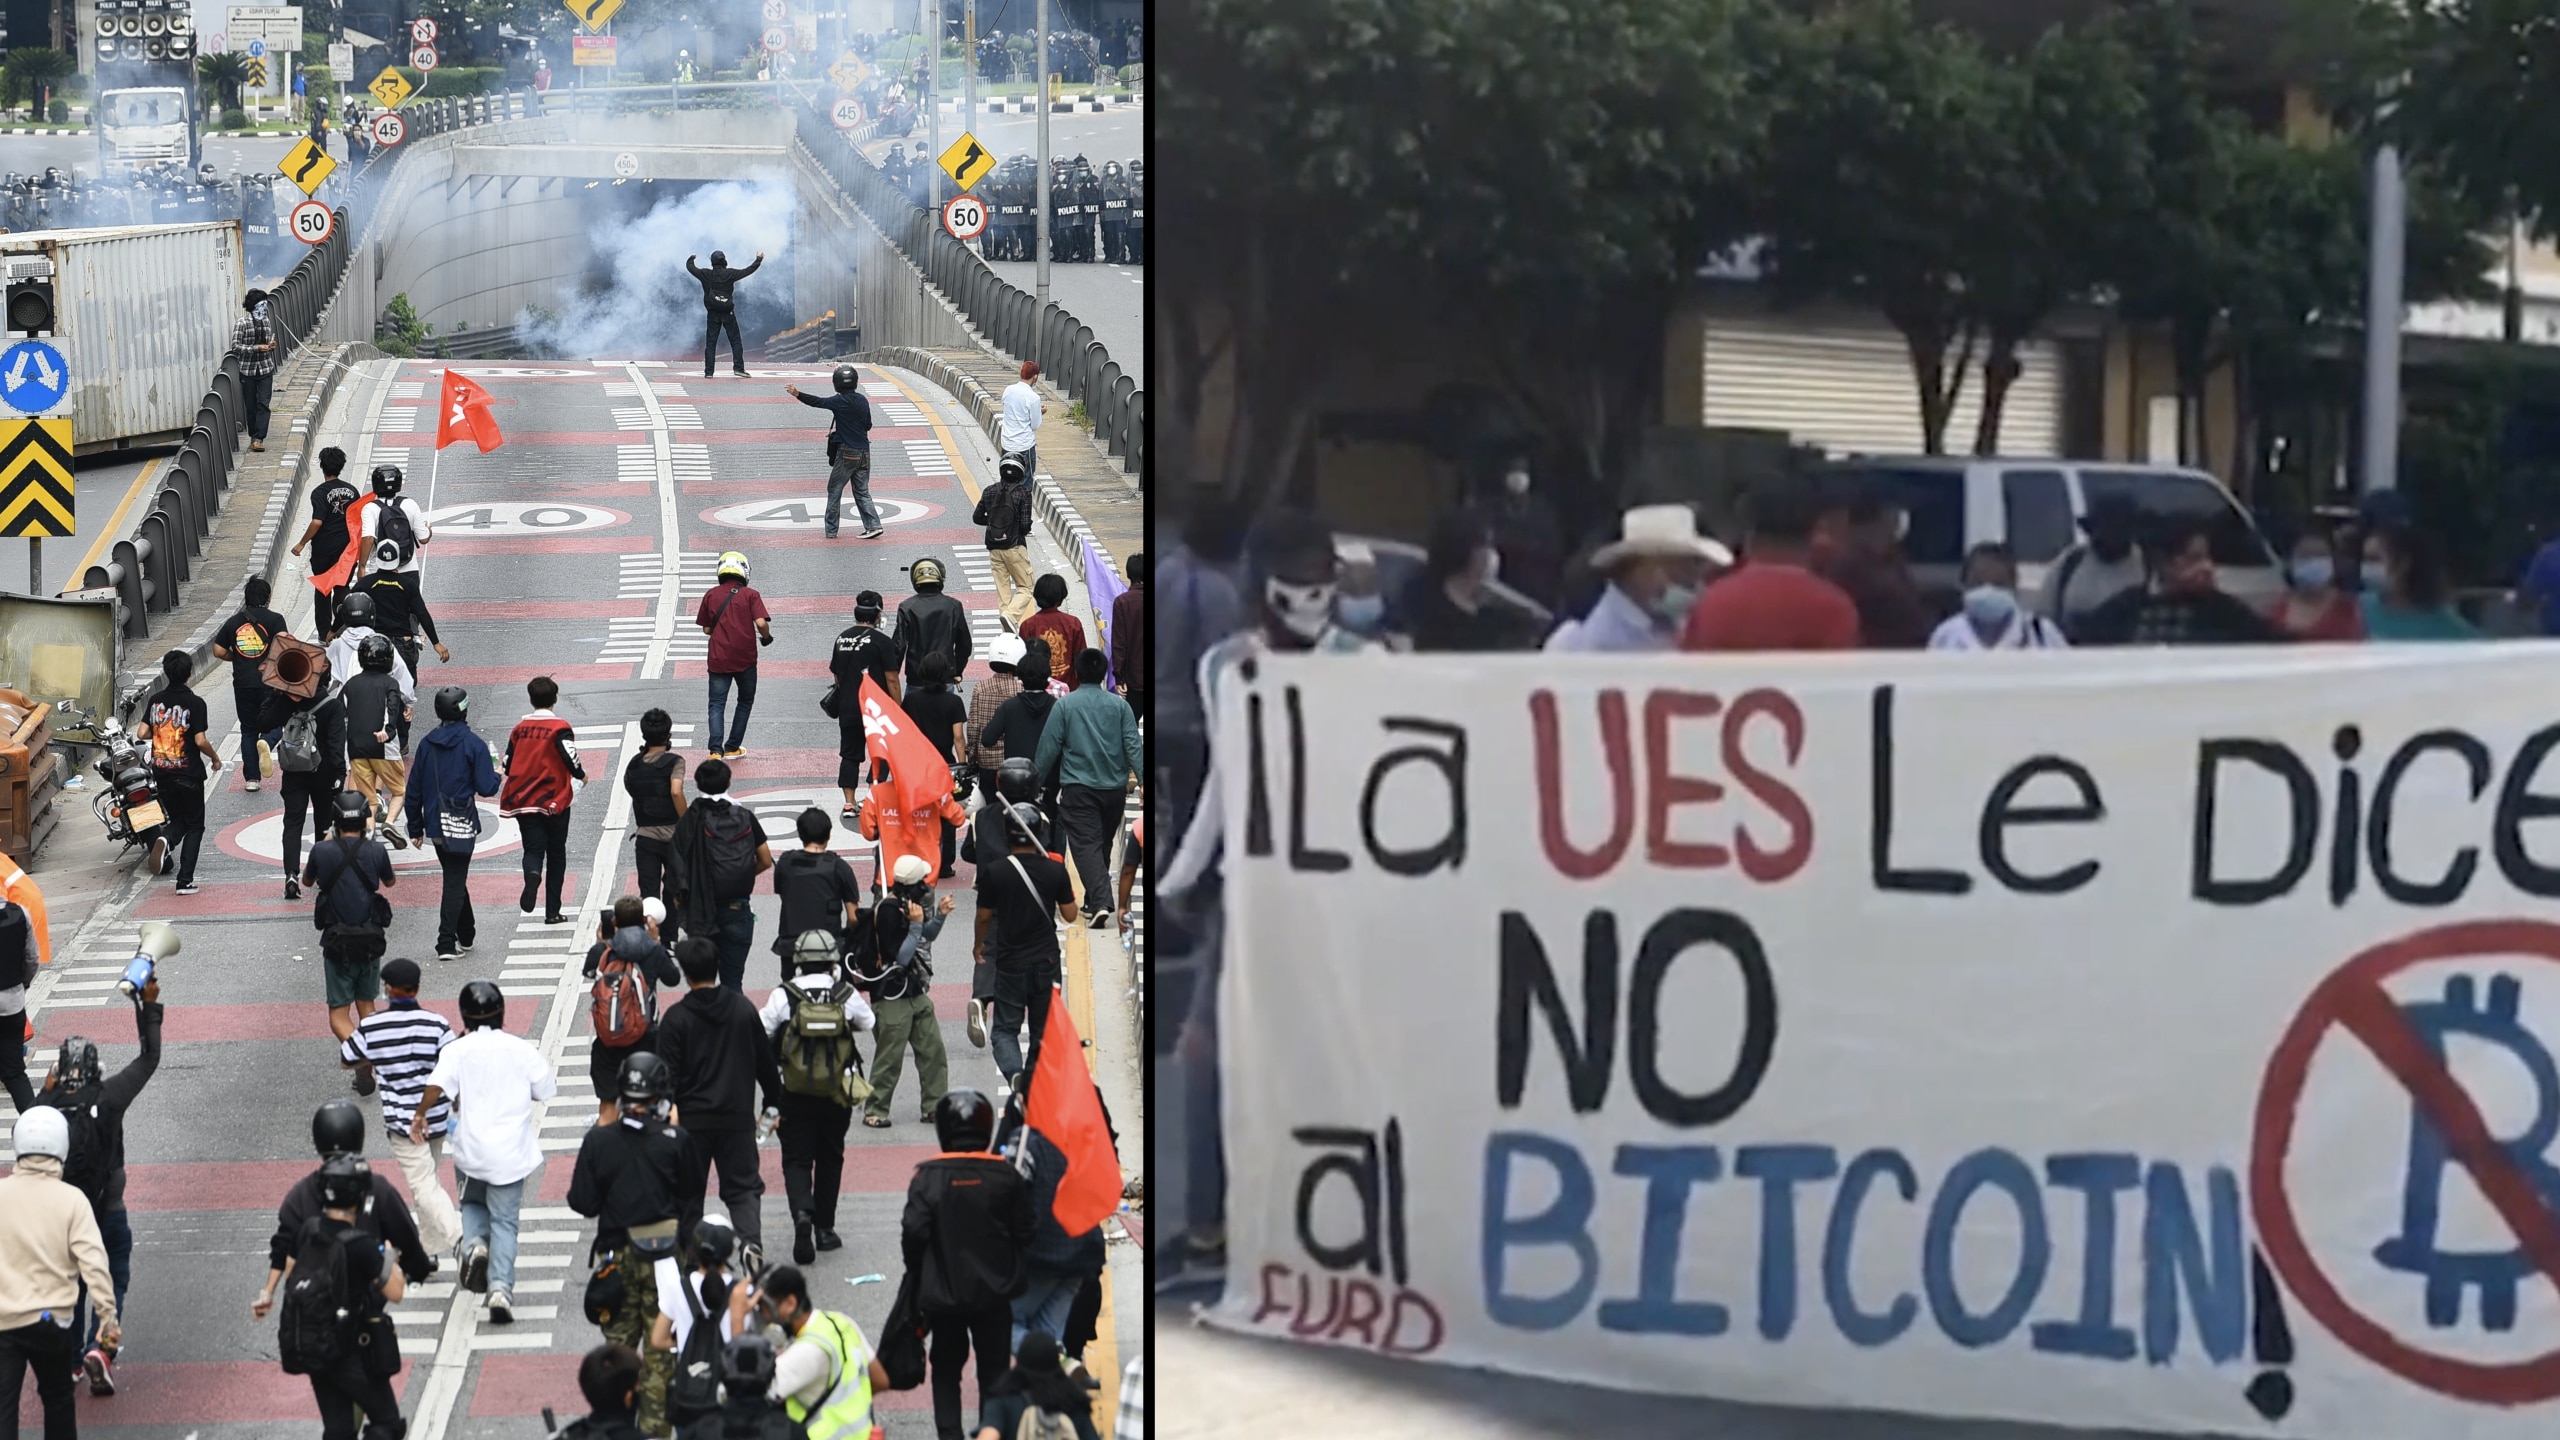 The first day of bitcoin in El Salvador ended in disaster.  Protests, burned tires and a threatening fall in the value of cryptocurrencies